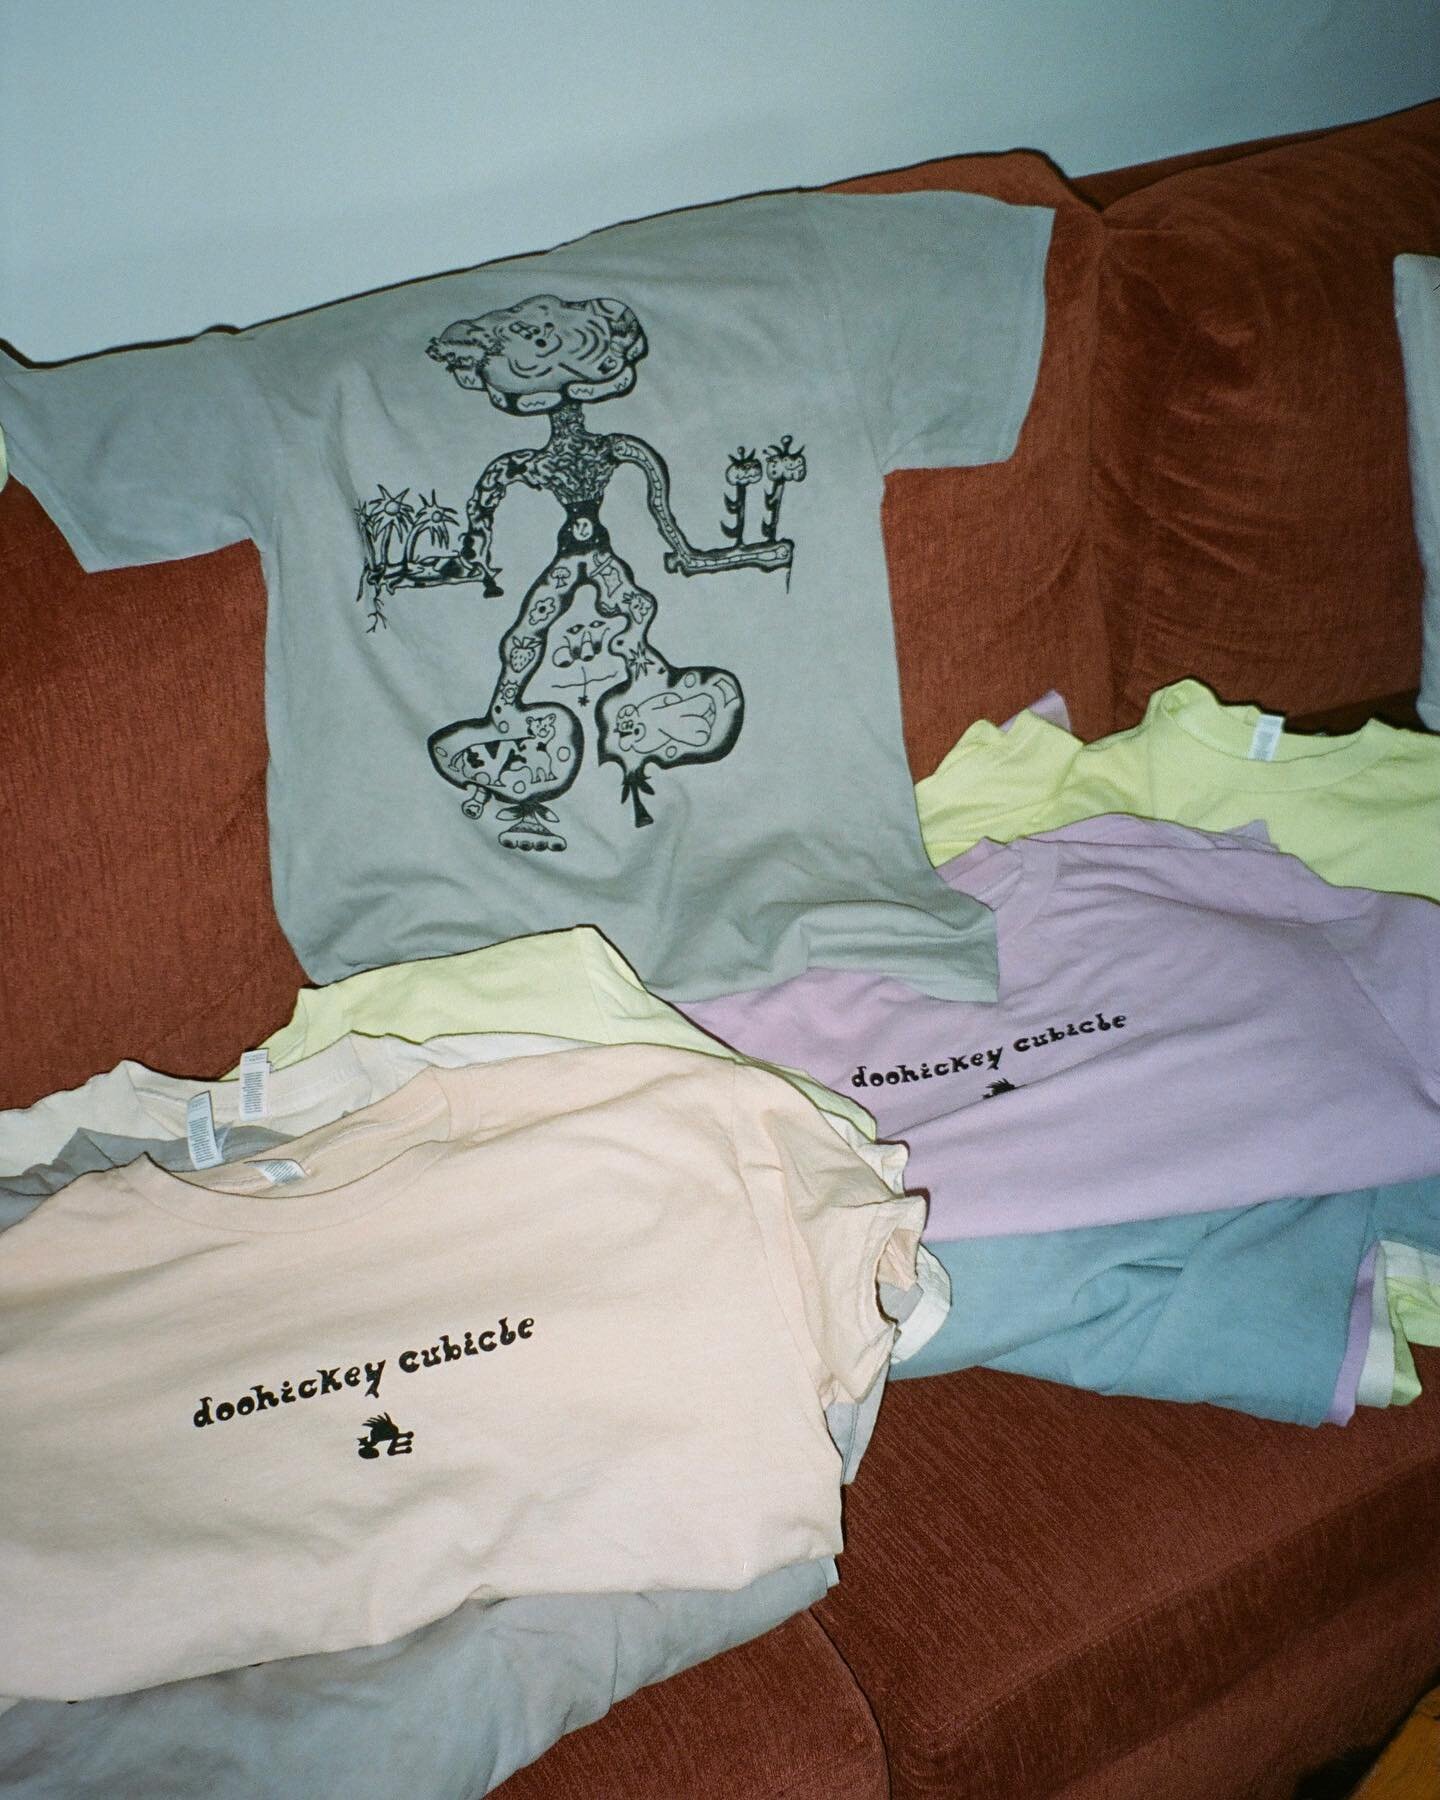 ❕MERCH❕ we have some fresh TEES up on our bandcamp. artwork by @clear.dog.food and dyed by @___sgrazi ~ such a fun time being her dye apprentice 🥰 very limited numbers of each colour ! Also comes with a digital download of our album :o 

Colours:
Pa